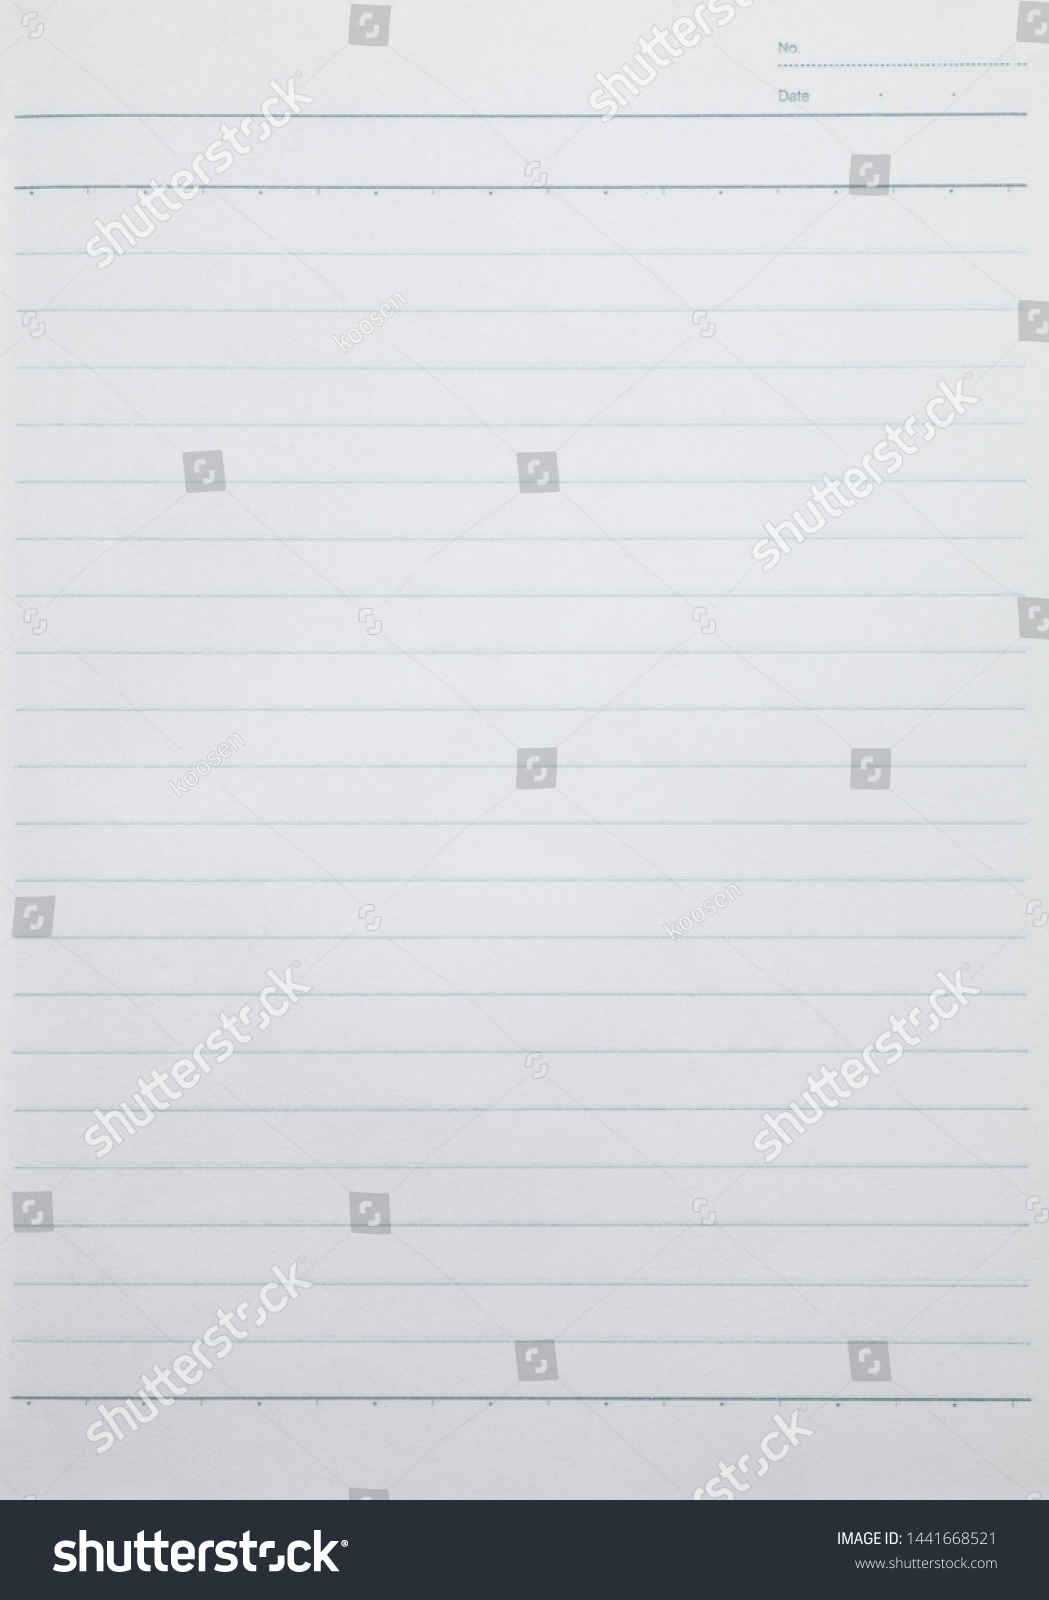 Lined Sheet Paper Blank Half Writing Printable Template With Regard To Blank Letter Writing Template For Kids